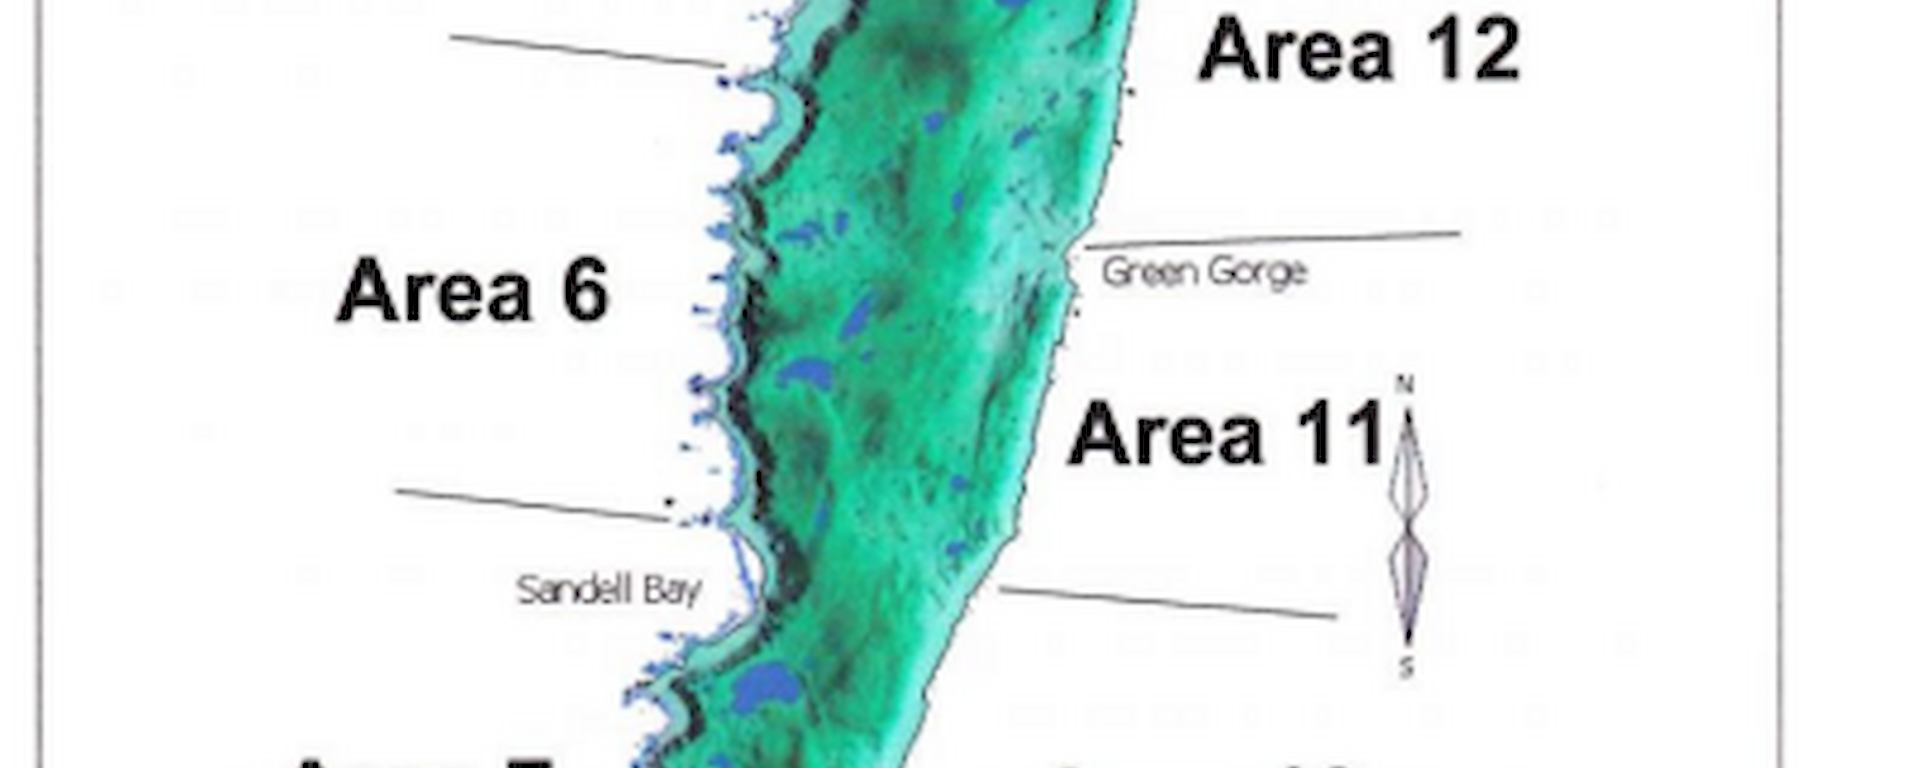 Map of Macquarie Island showing the numbered areas for the census